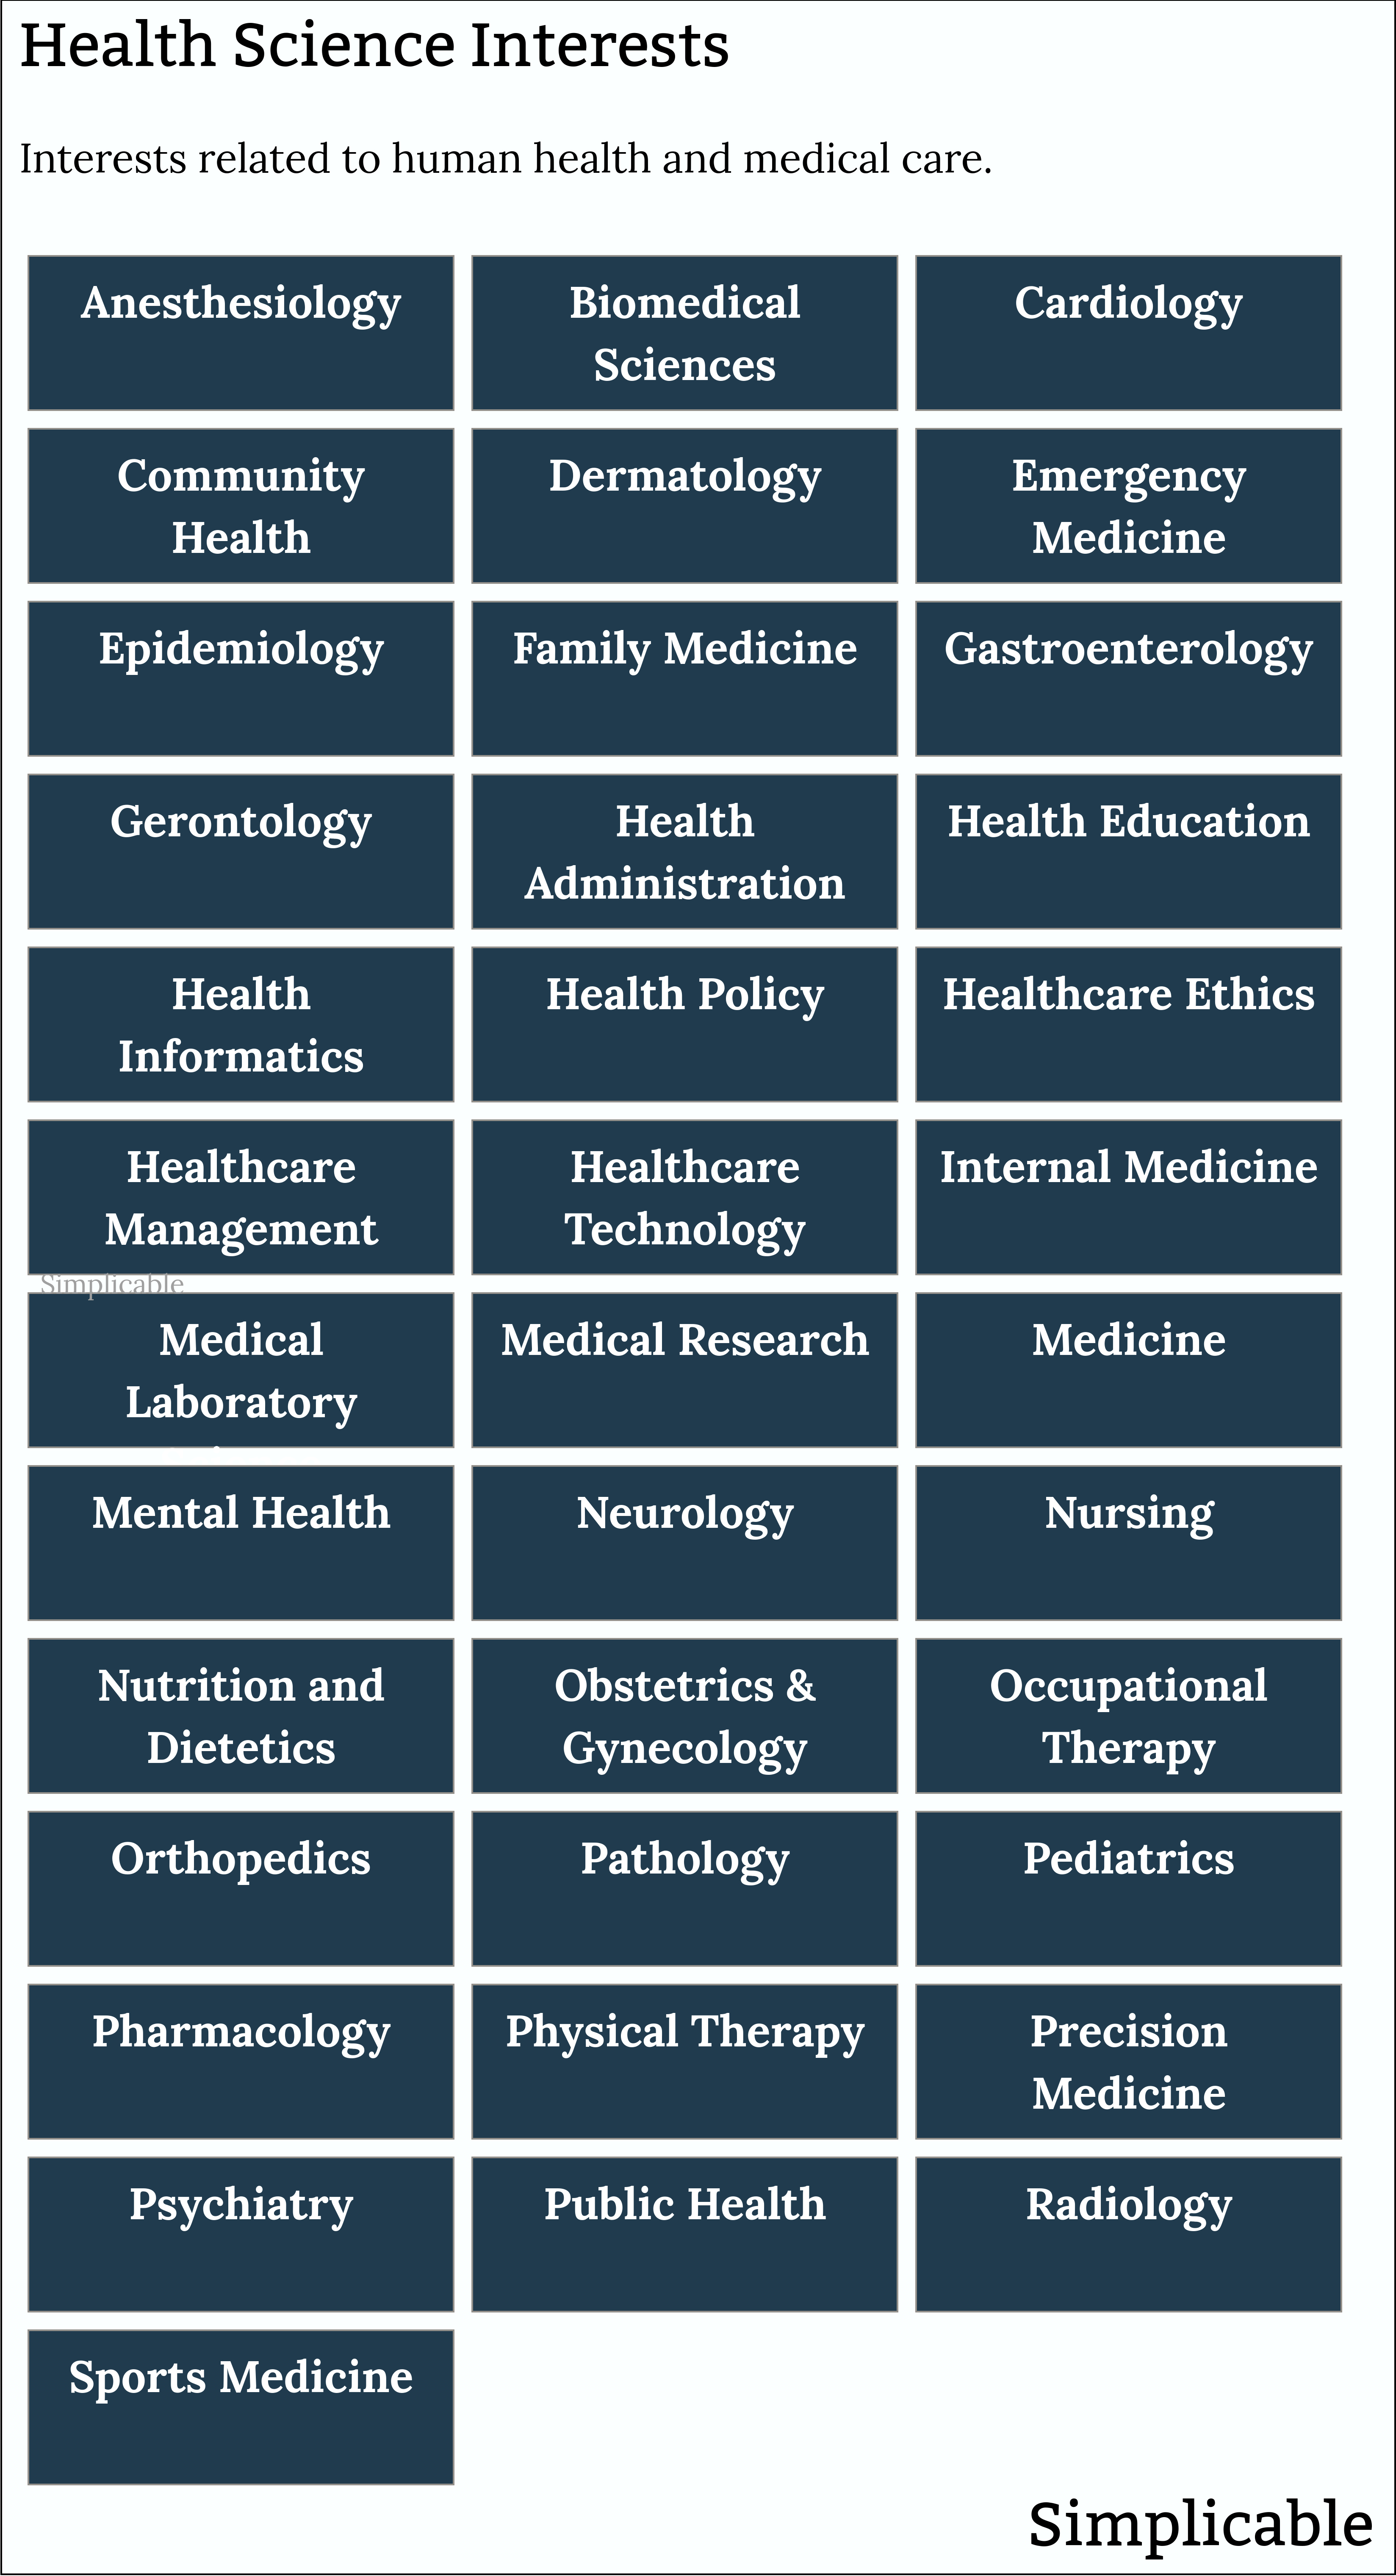 examples of health science interests